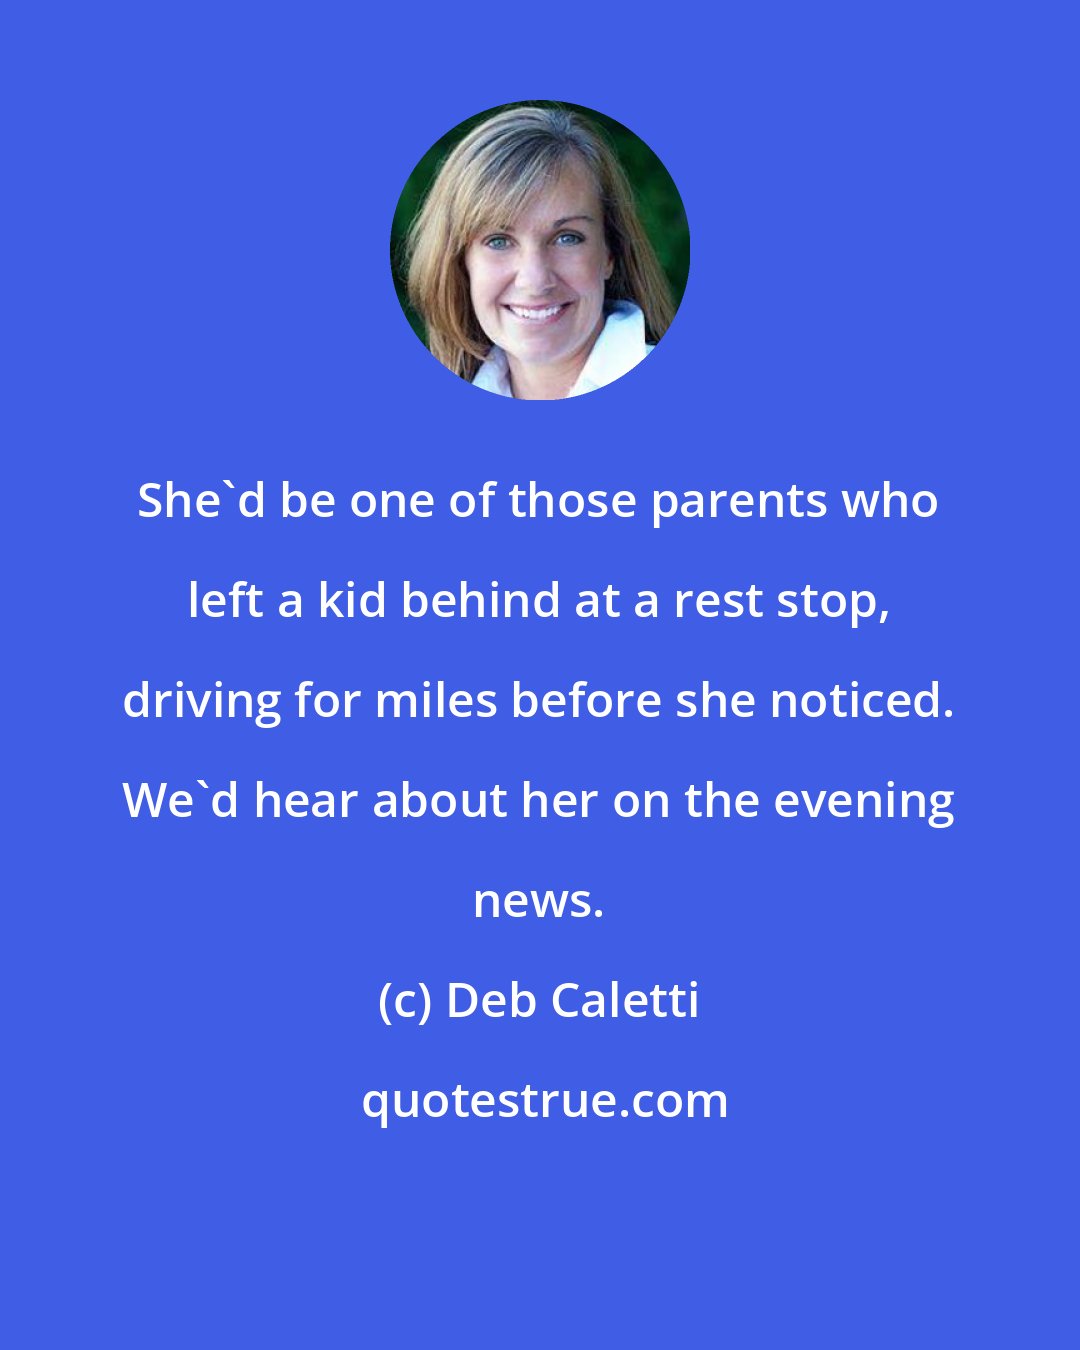 Deb Caletti: She'd be one of those parents who left a kid behind at a rest stop, driving for miles before she noticed. We'd hear about her on the evening news.